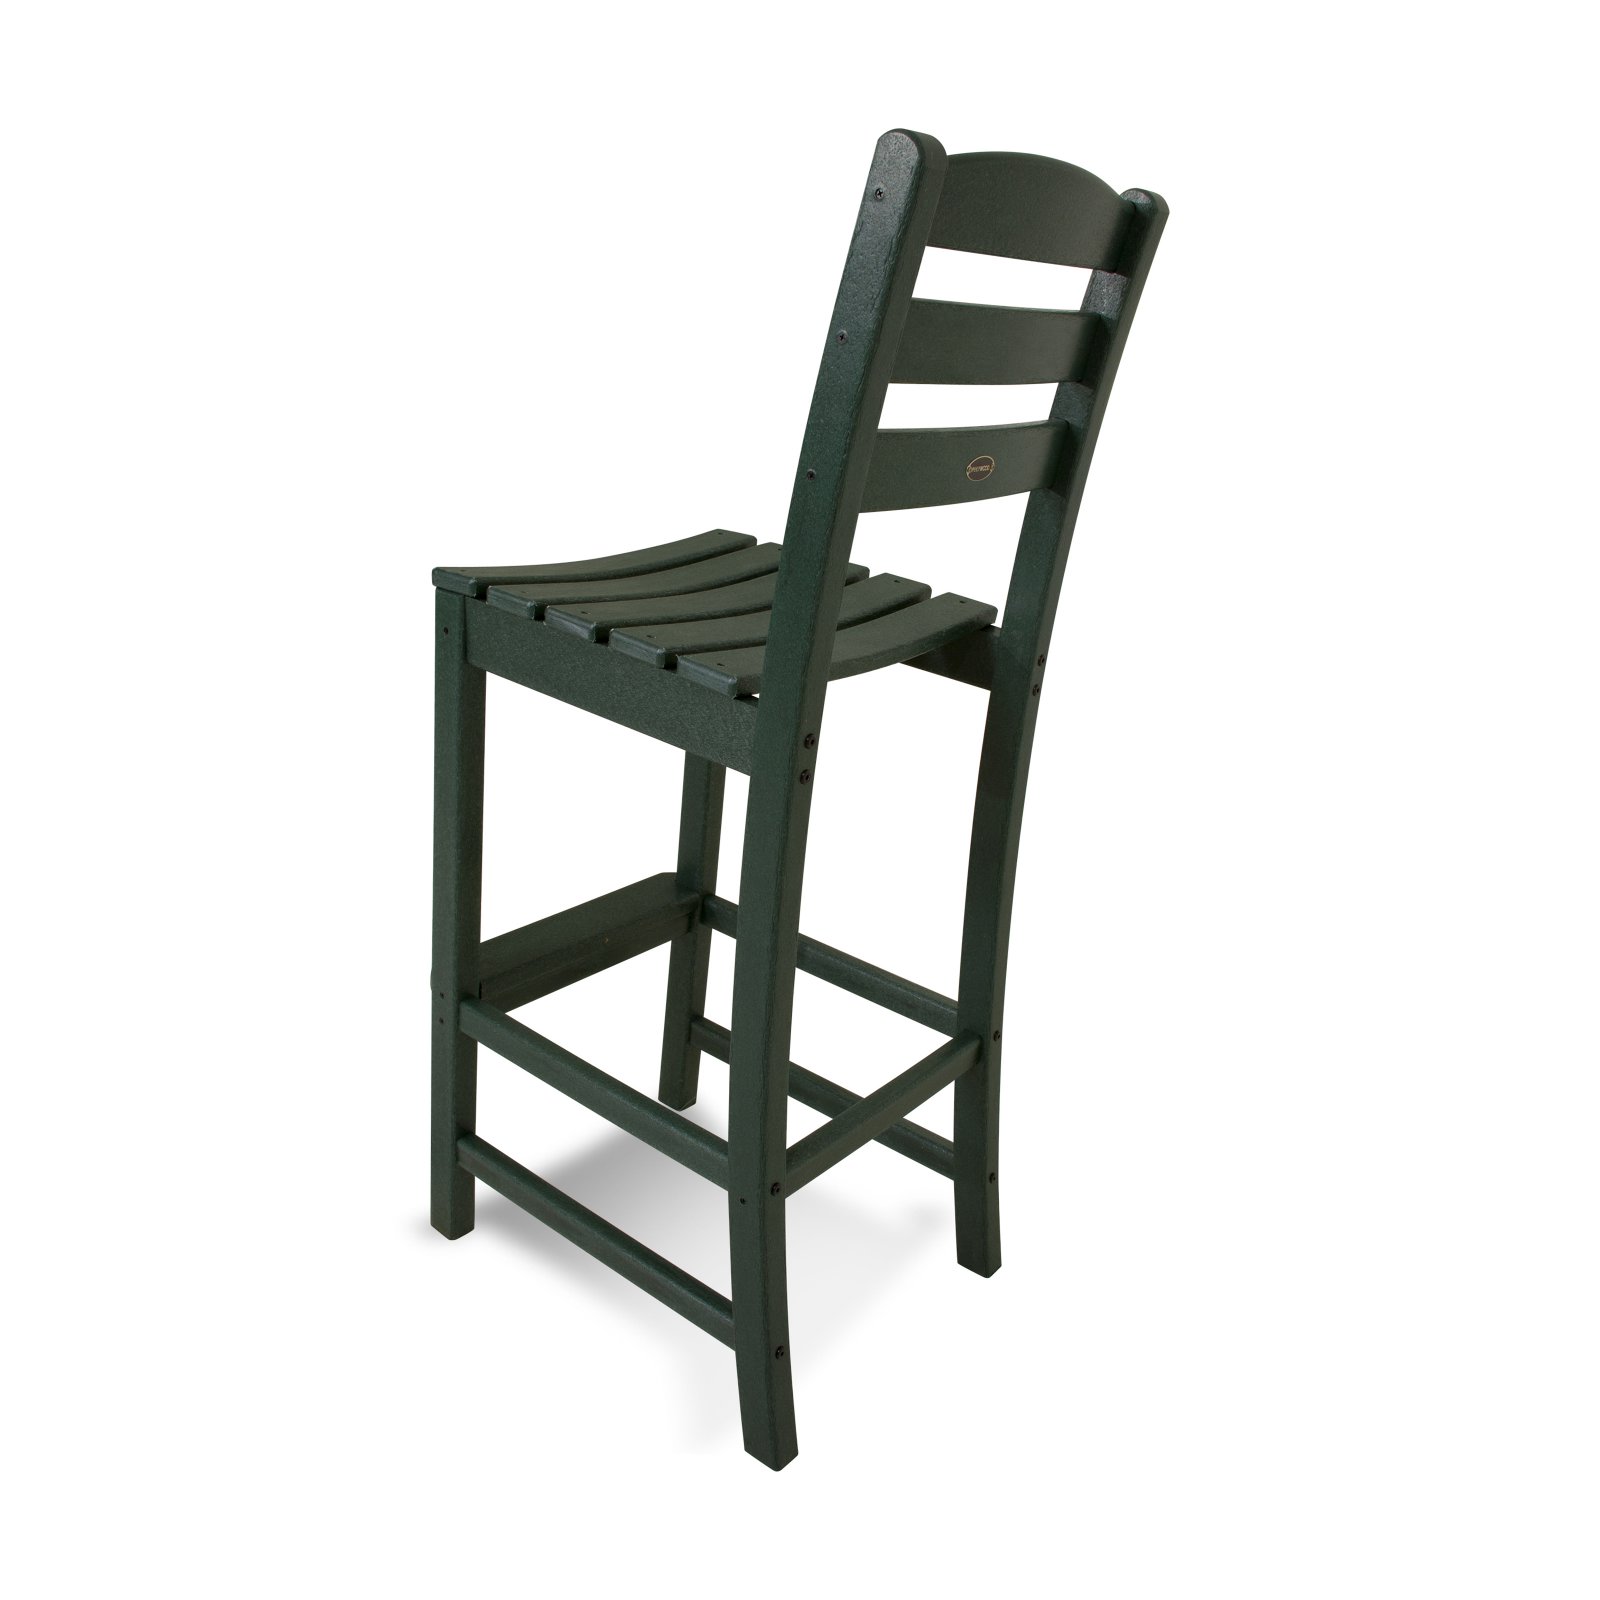 Polywood La Casa Cafe Outdoor Bar Chair in Green - image 3 of 4